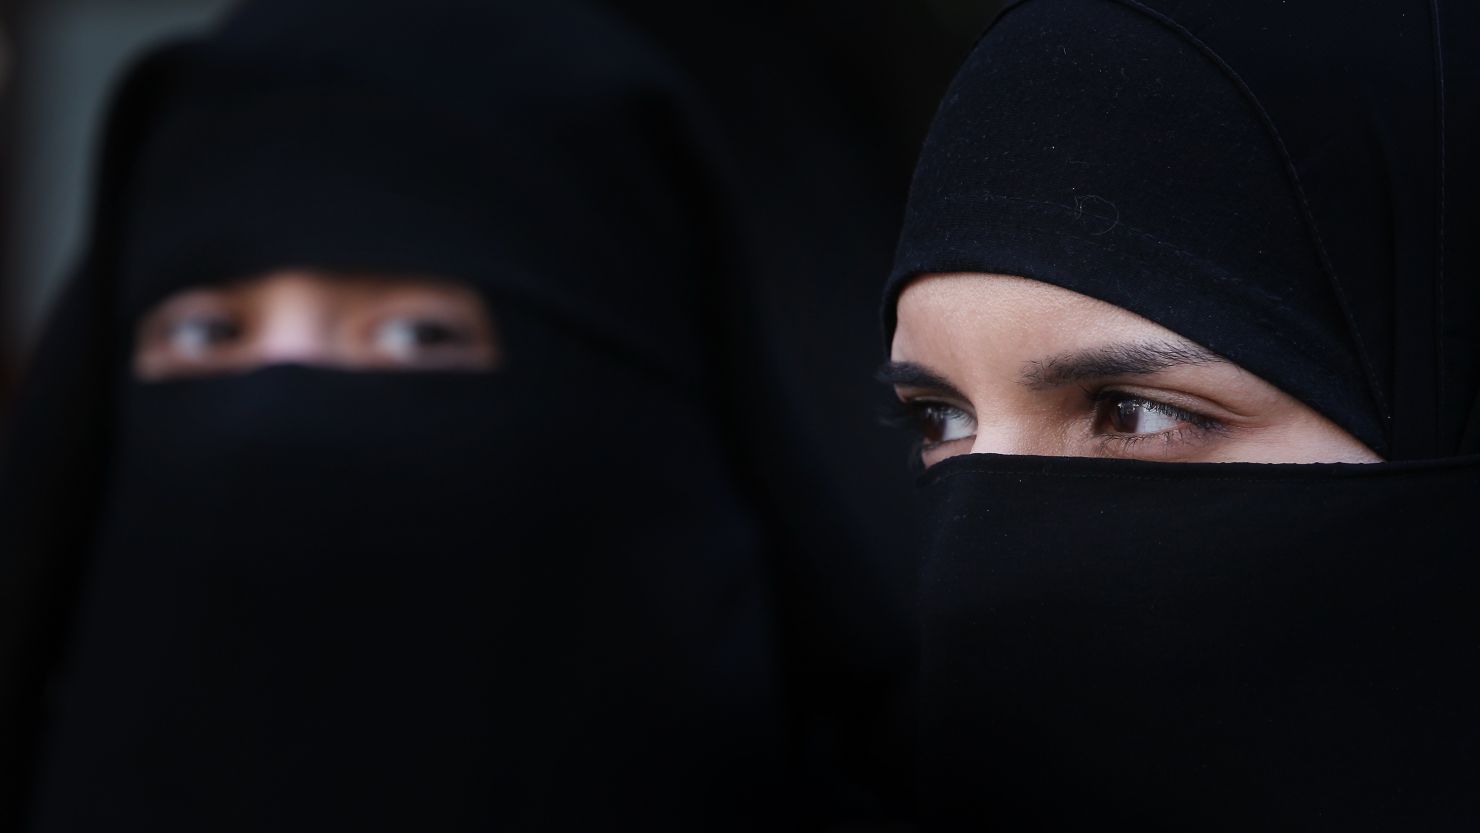 France outlawed wearing a burqa in public in 2011.